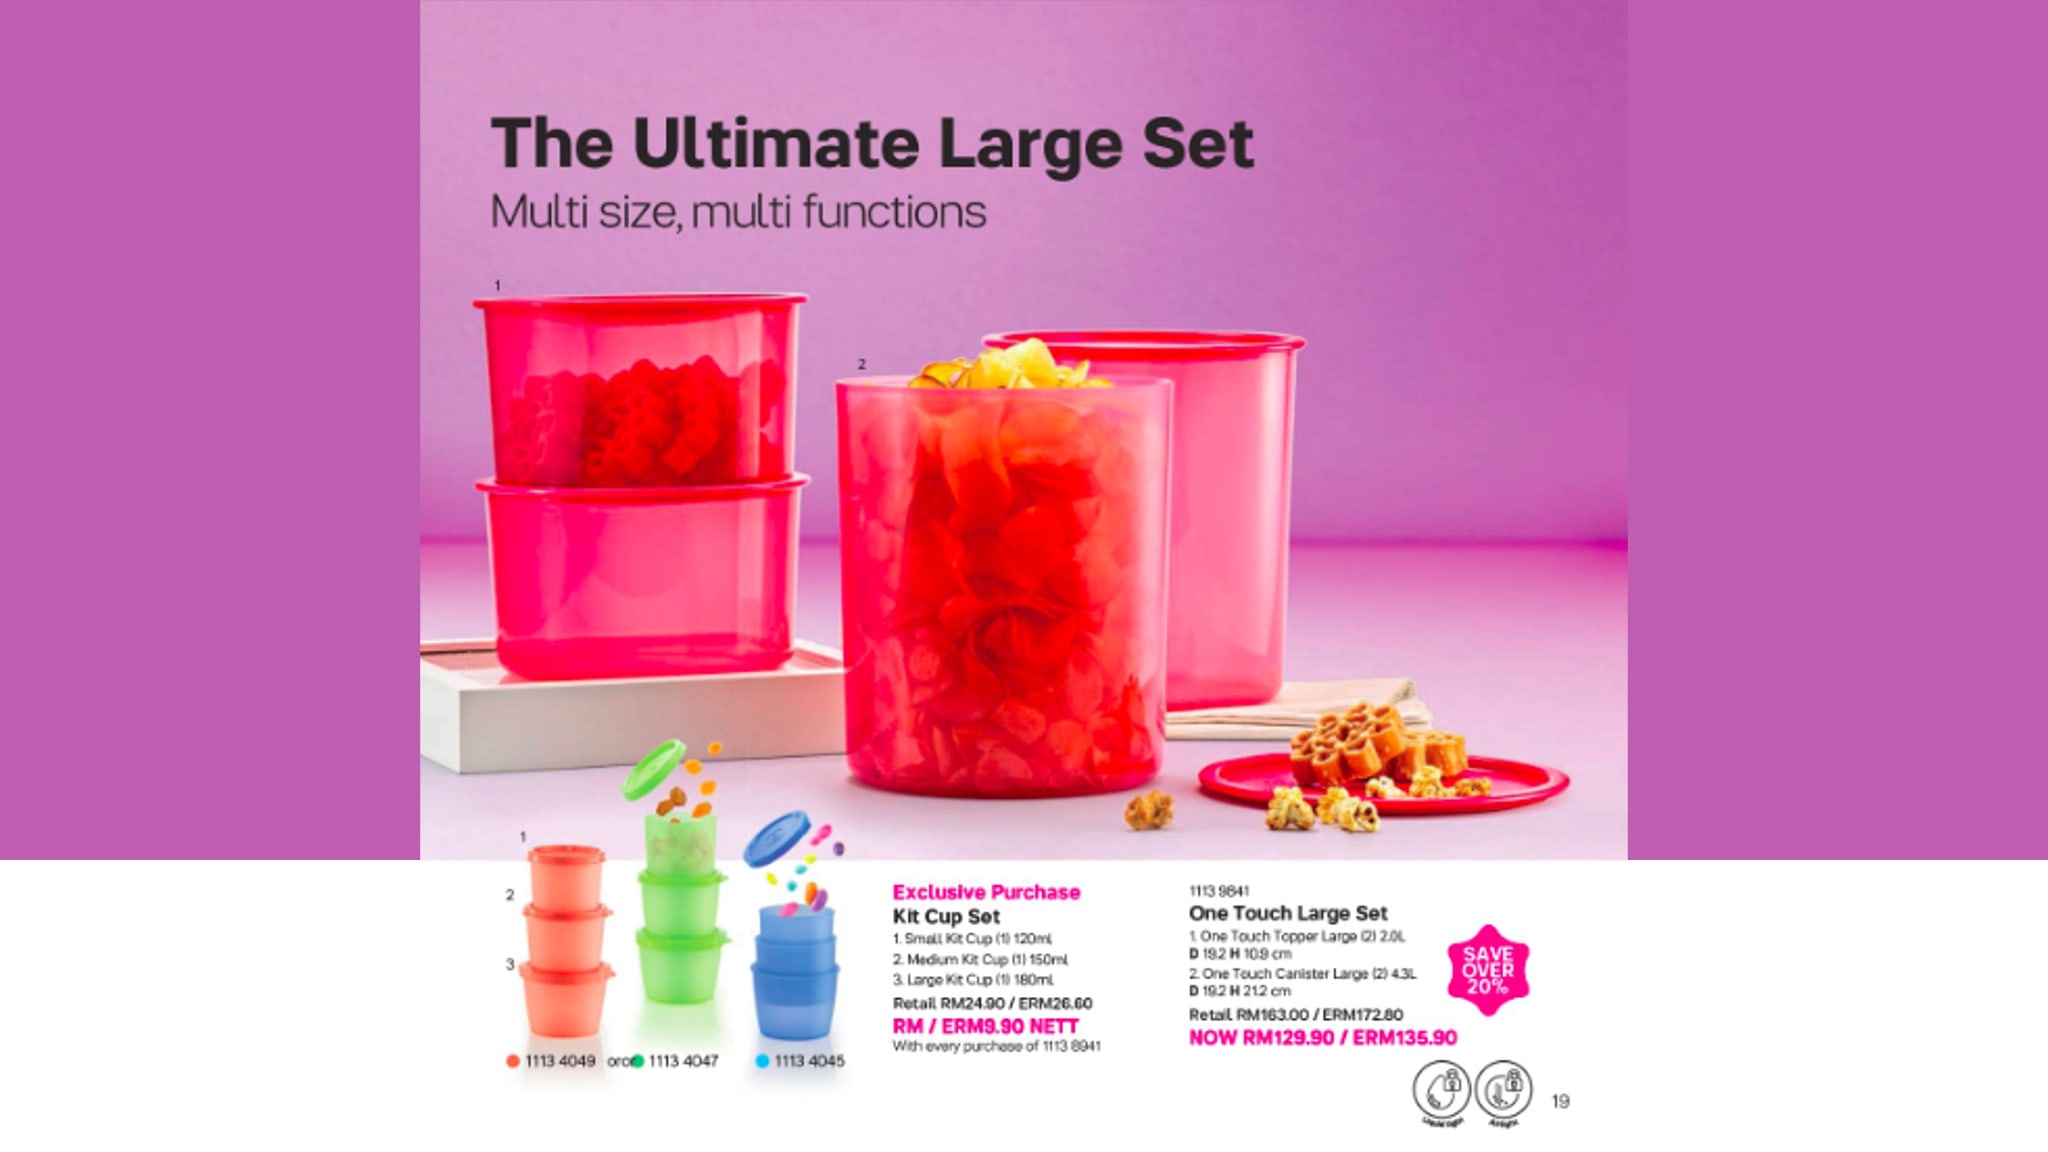 One Touch Large Set